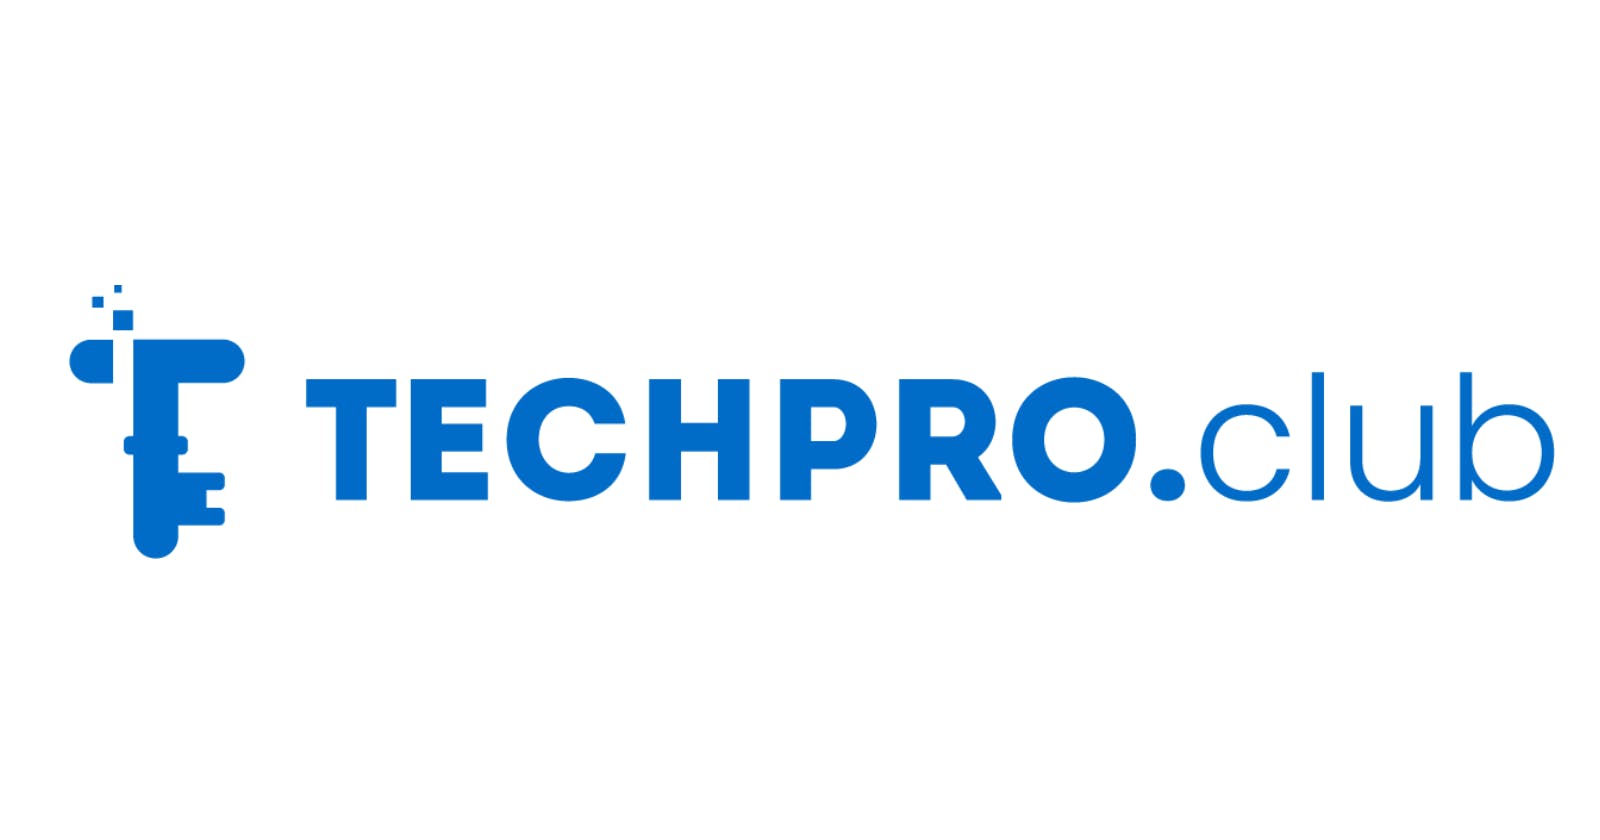 Introducing Techpro.club: A platform to discover amazing opensource projects